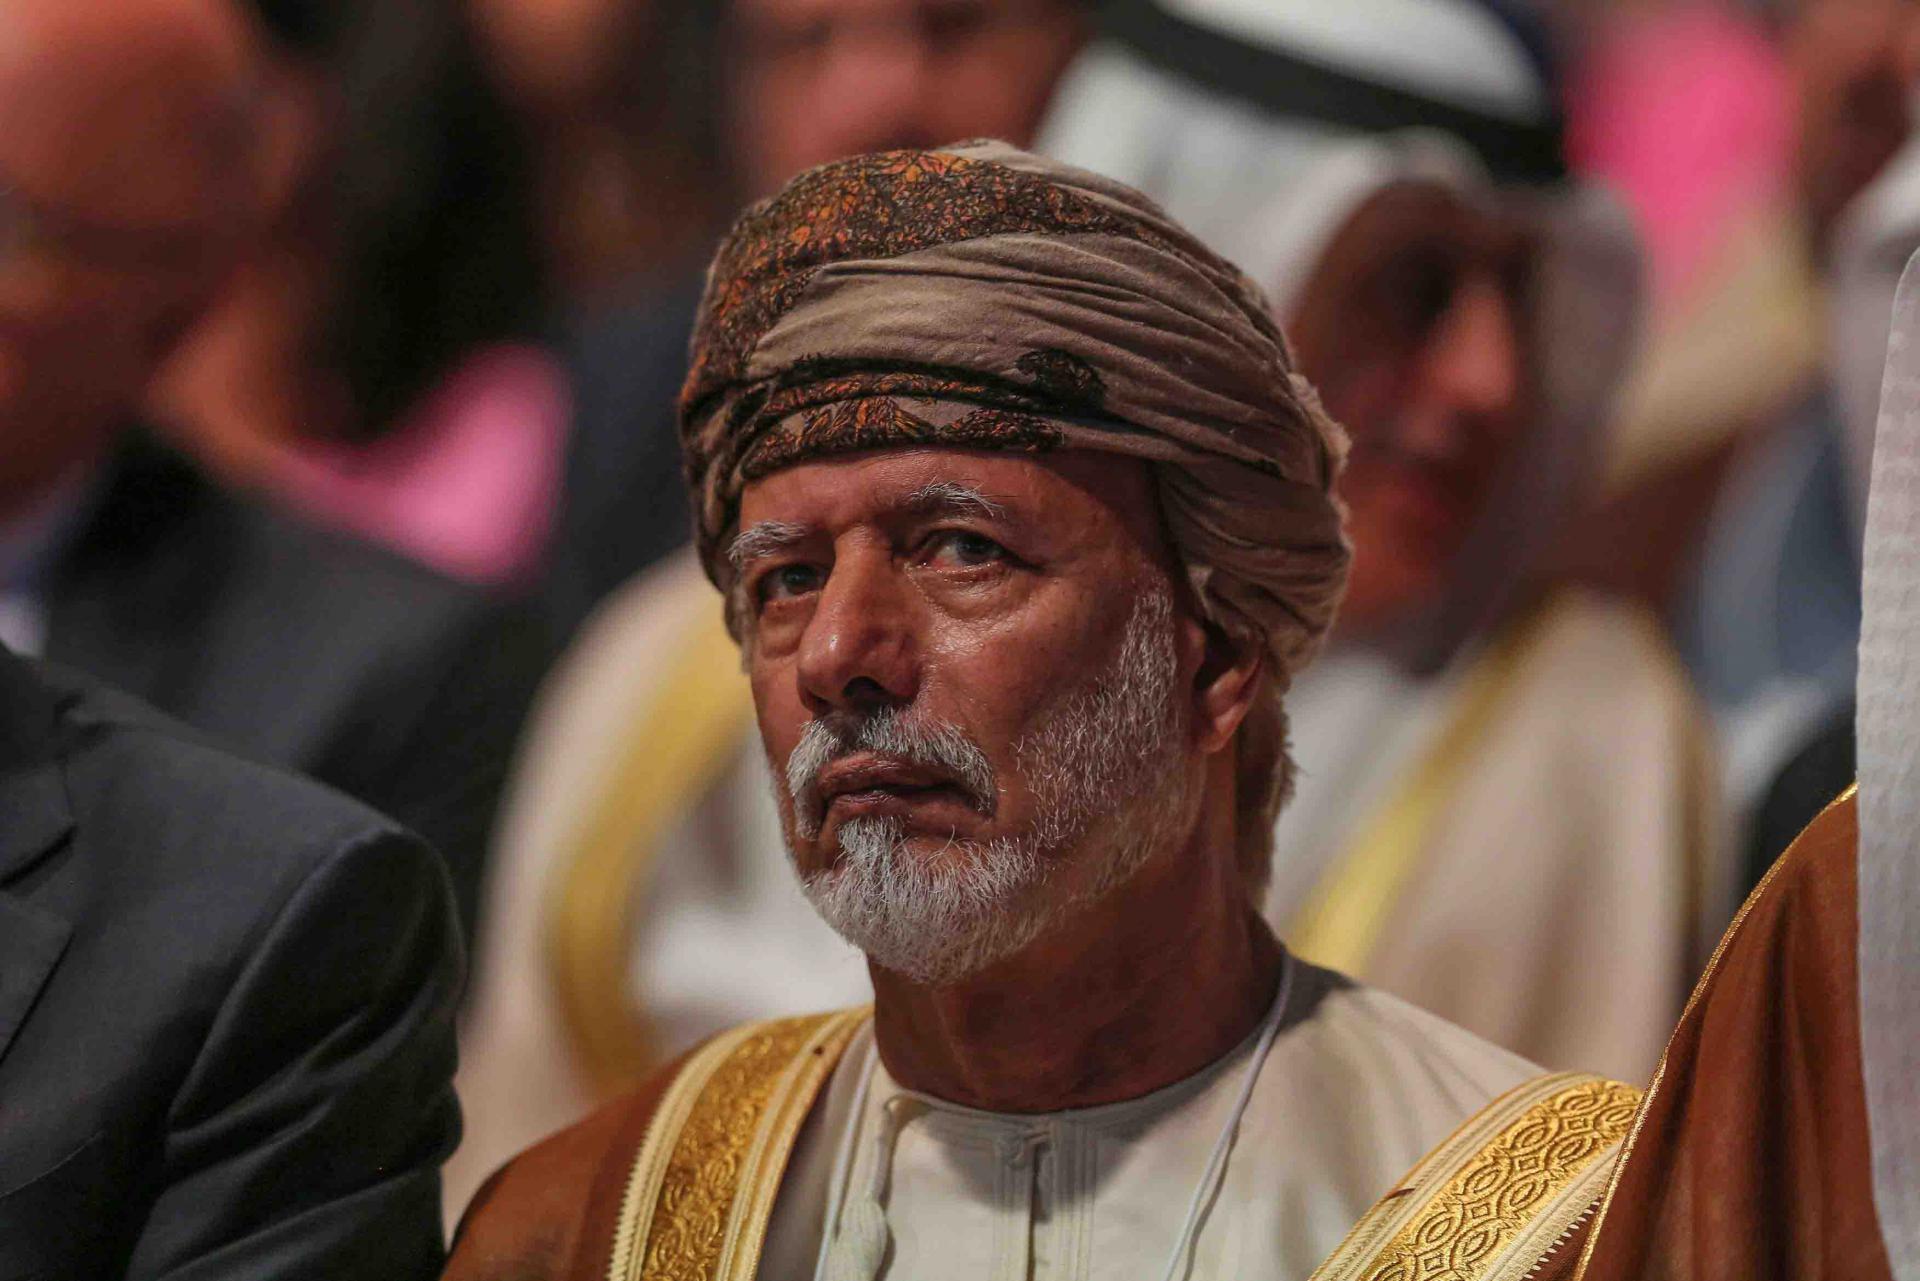 Oman is one of the few Arab states to have maintained ties with Damascus over the past eight years